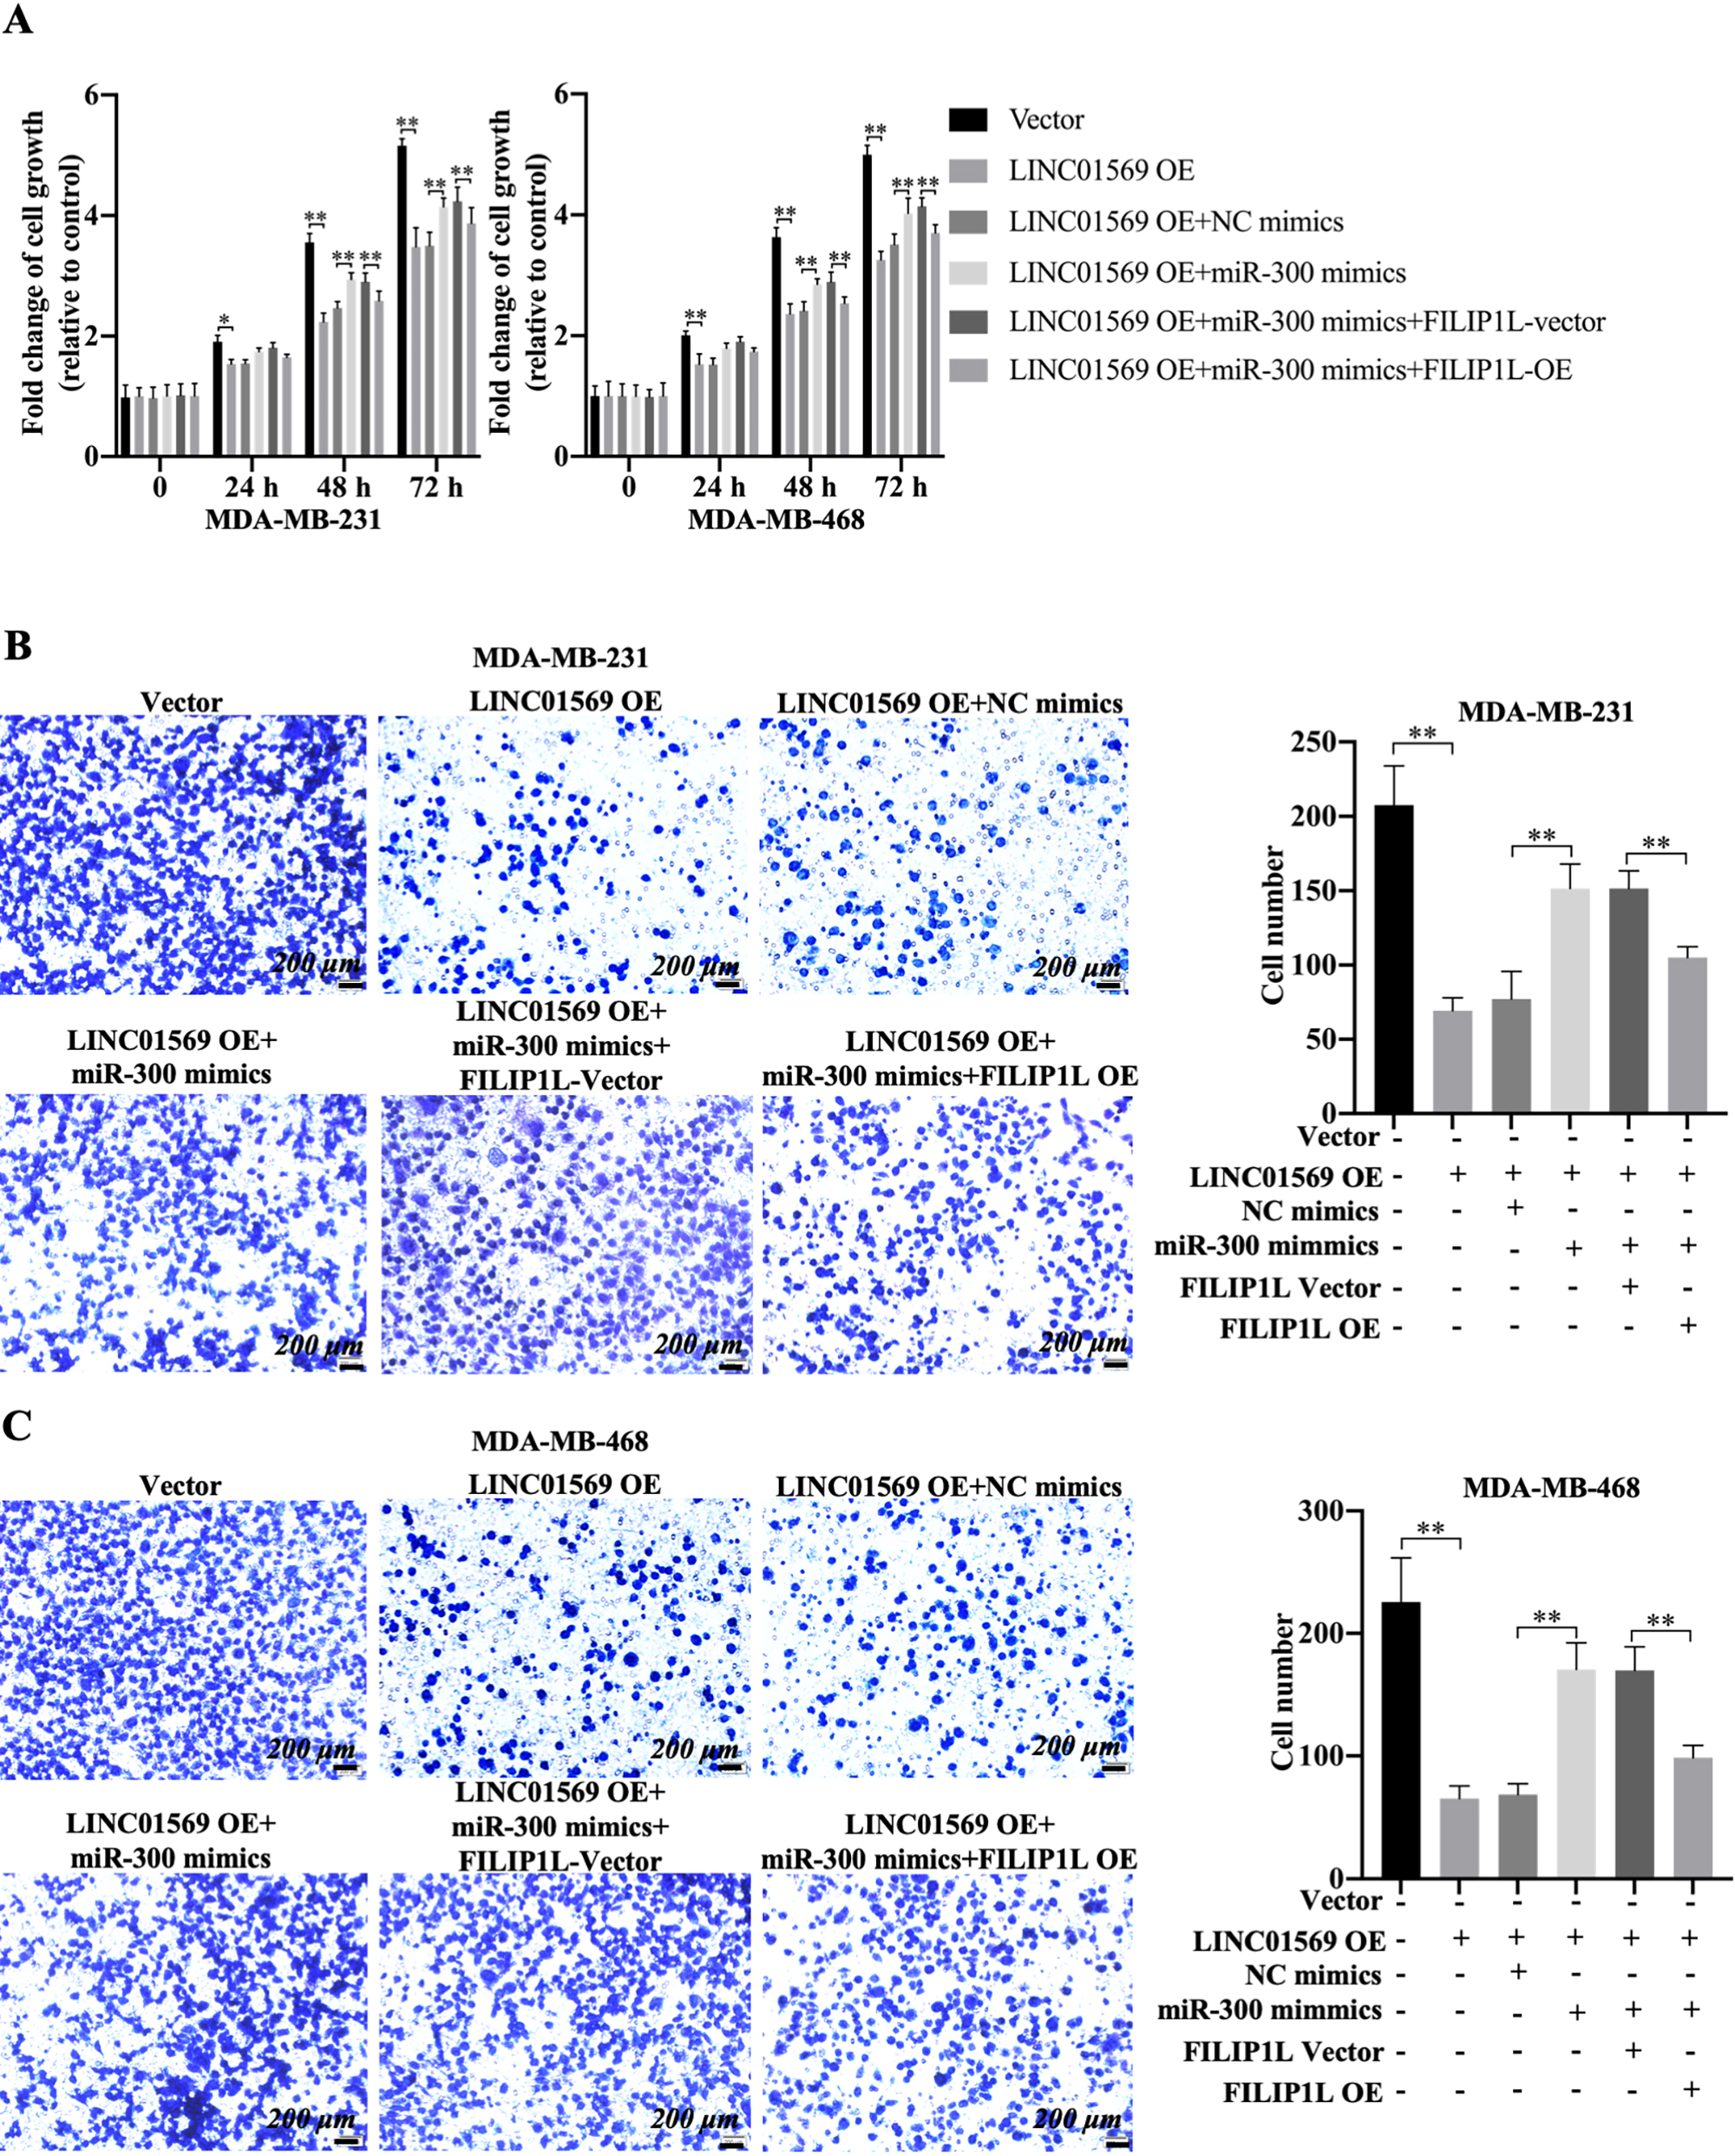 Effects of LINC01569/miR-300/FILIP1L axis in cell viability and migration of TNBC cells. MDA-MB-231 and MDA-MB-468 cells were transfected with vector, LINC01569 OE, LINC01569 OE plus NC mimics, LINC01569 OE plus miR-300 mimics, the combination of LINC01569 OE, miR-300 mimics plus FILIP1L vector, and the combination of LINC01569 OE, miR-300 mimics plus FILIP1L-OE. (A) CCK-8 assays were performed to evaluate the cell viability for 0, 24, 48, and 72 h. ** Indicated LINC01569-overexpression or LINC01569-overexpression with miR-300 mimics or LINC01569-overexpression and miR-300 mimics with FILIP1L-overexperssion vs. Vector or LINC01569-overexpression with NC mimics or LINC01569-overexpression and miR-300 mimics with NC-overexpression. Transwell assay was used to determine the migration ability of MDA-MB-231 (B) and MDA-MB-468 cells (C). The relative quantitation of the migrating cells is shown in the right panel. Scale: 200 μm. 